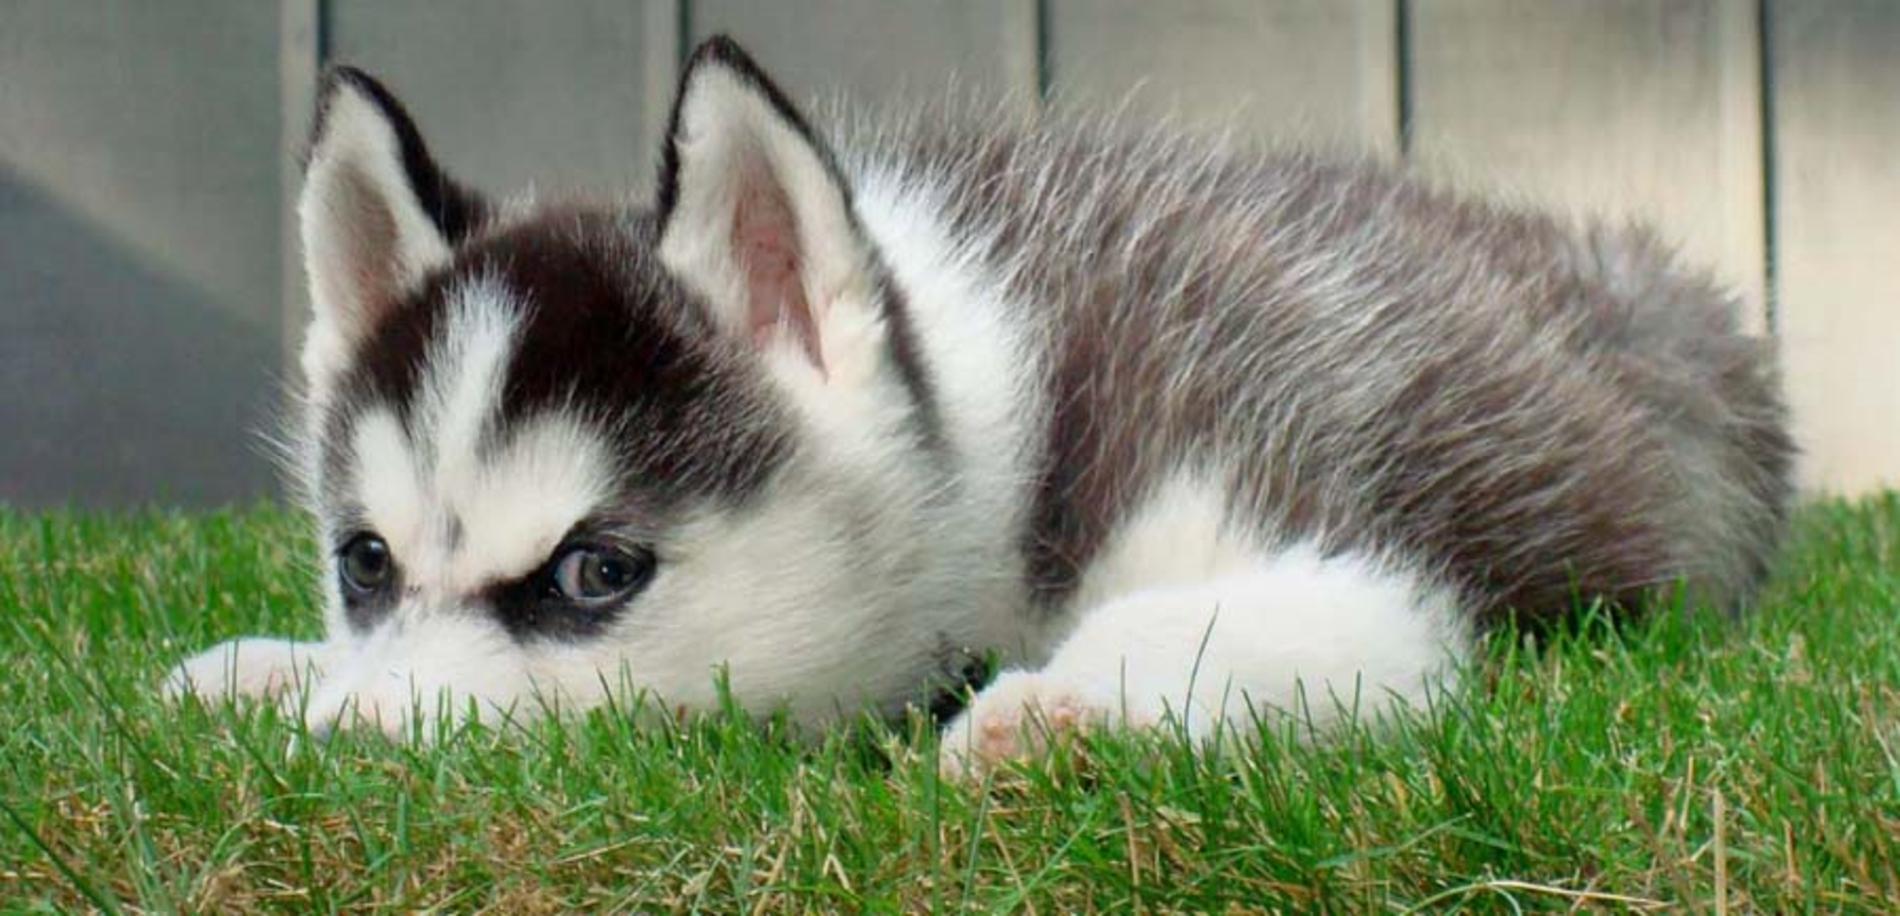 dogs-wallpapers-331-miniature-siberian-husky-dog-freein-pet-category-dog-images.jpg